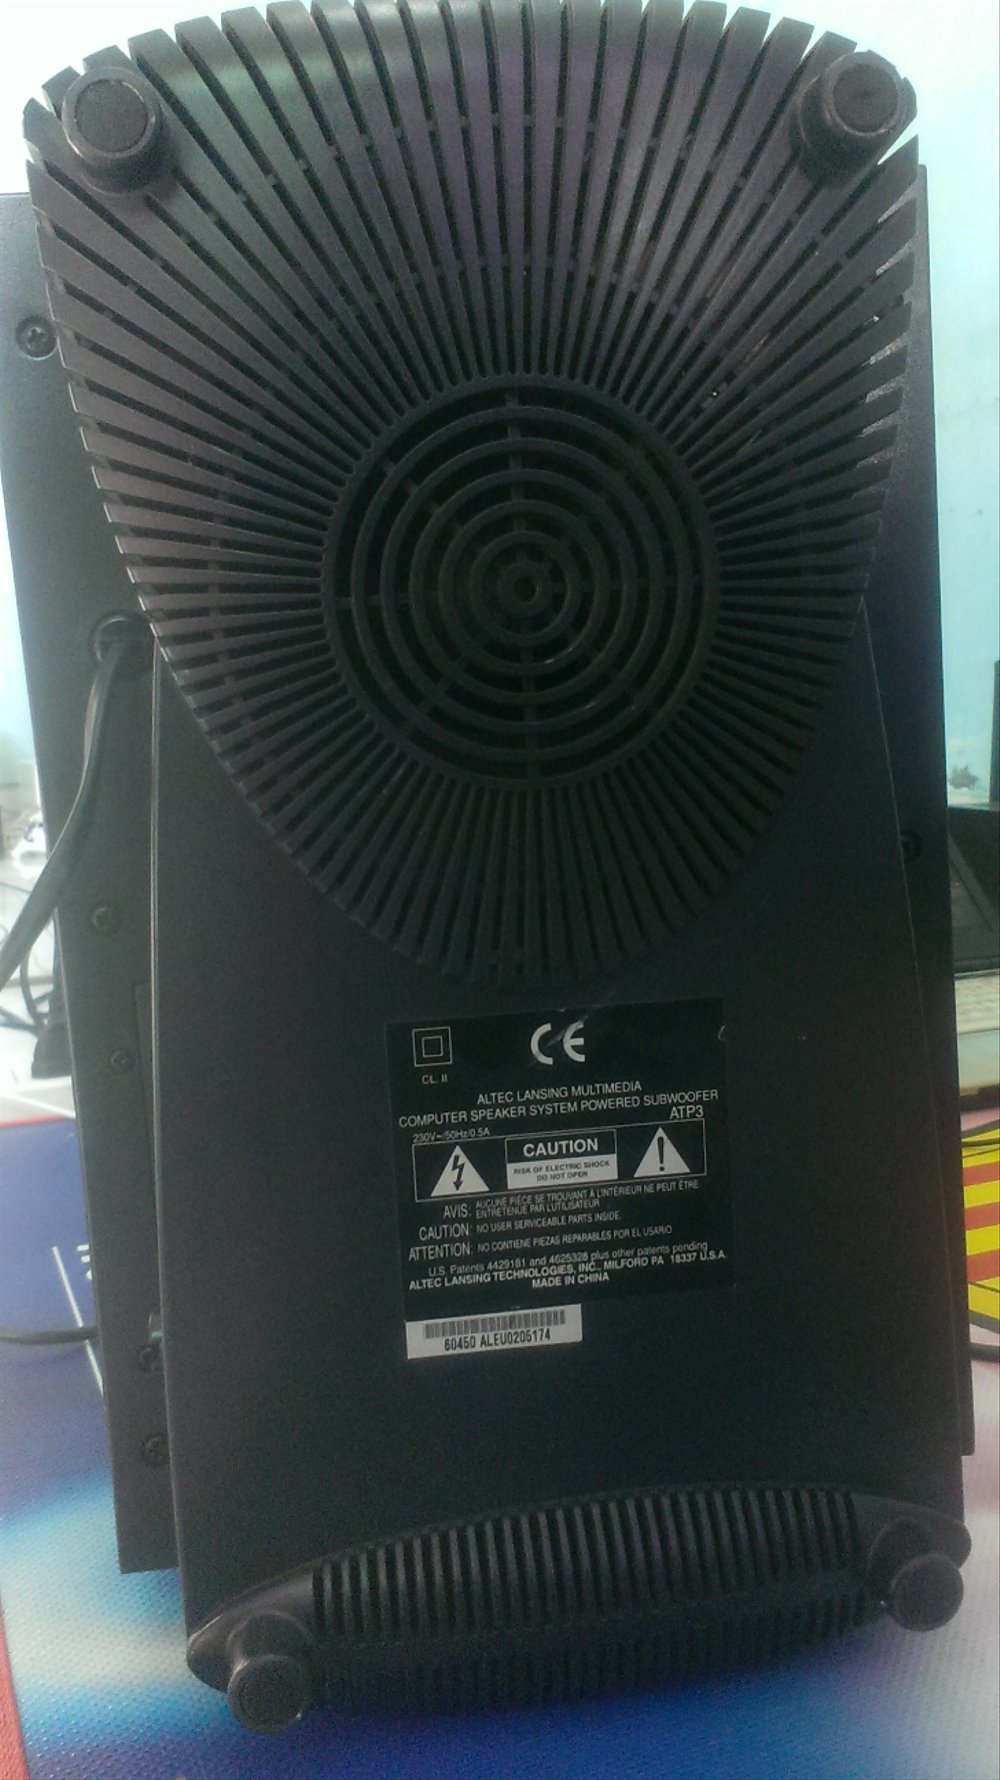 does anything compare to the altec lansing atp3?